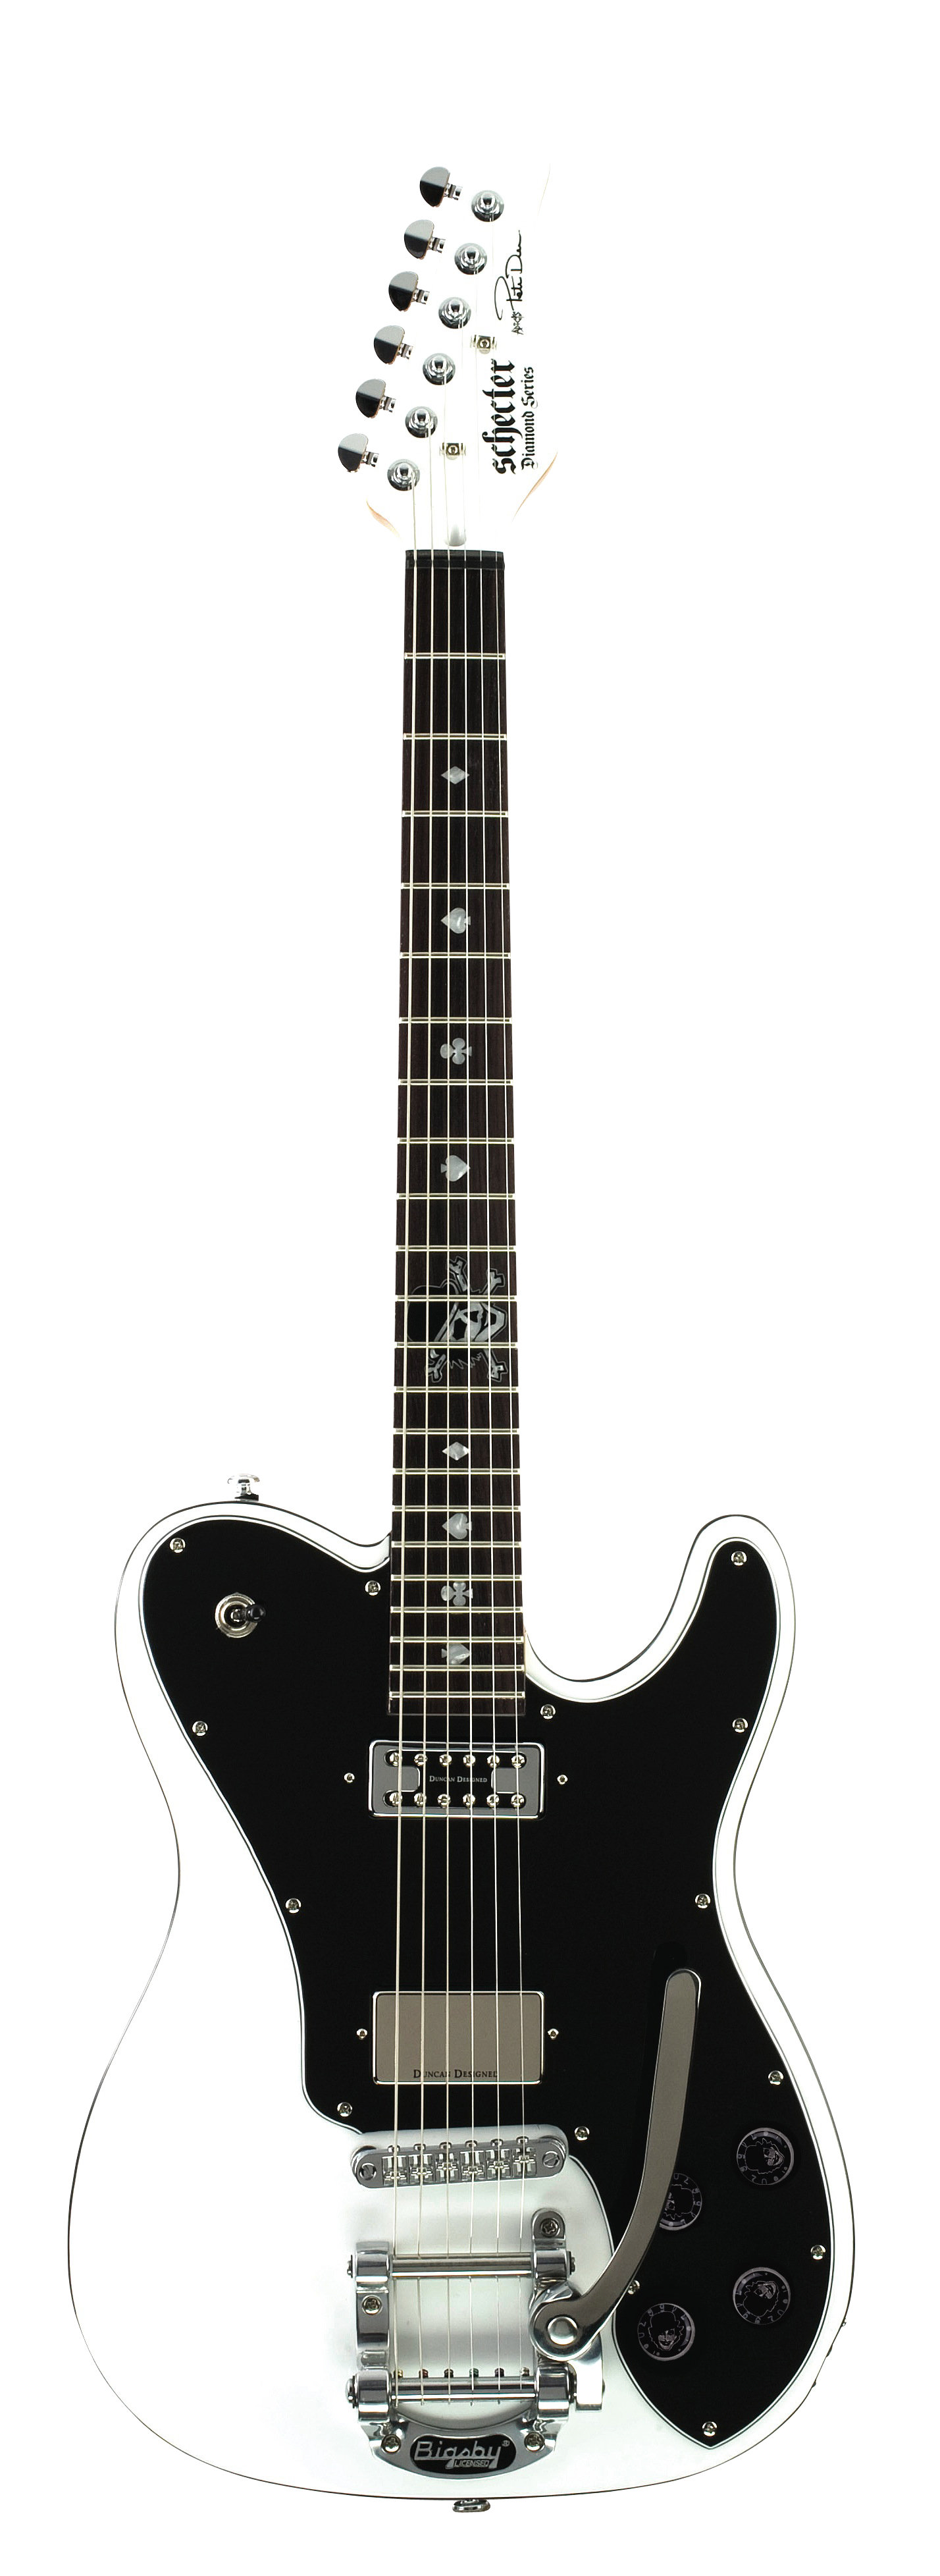 electric guitar silhouette